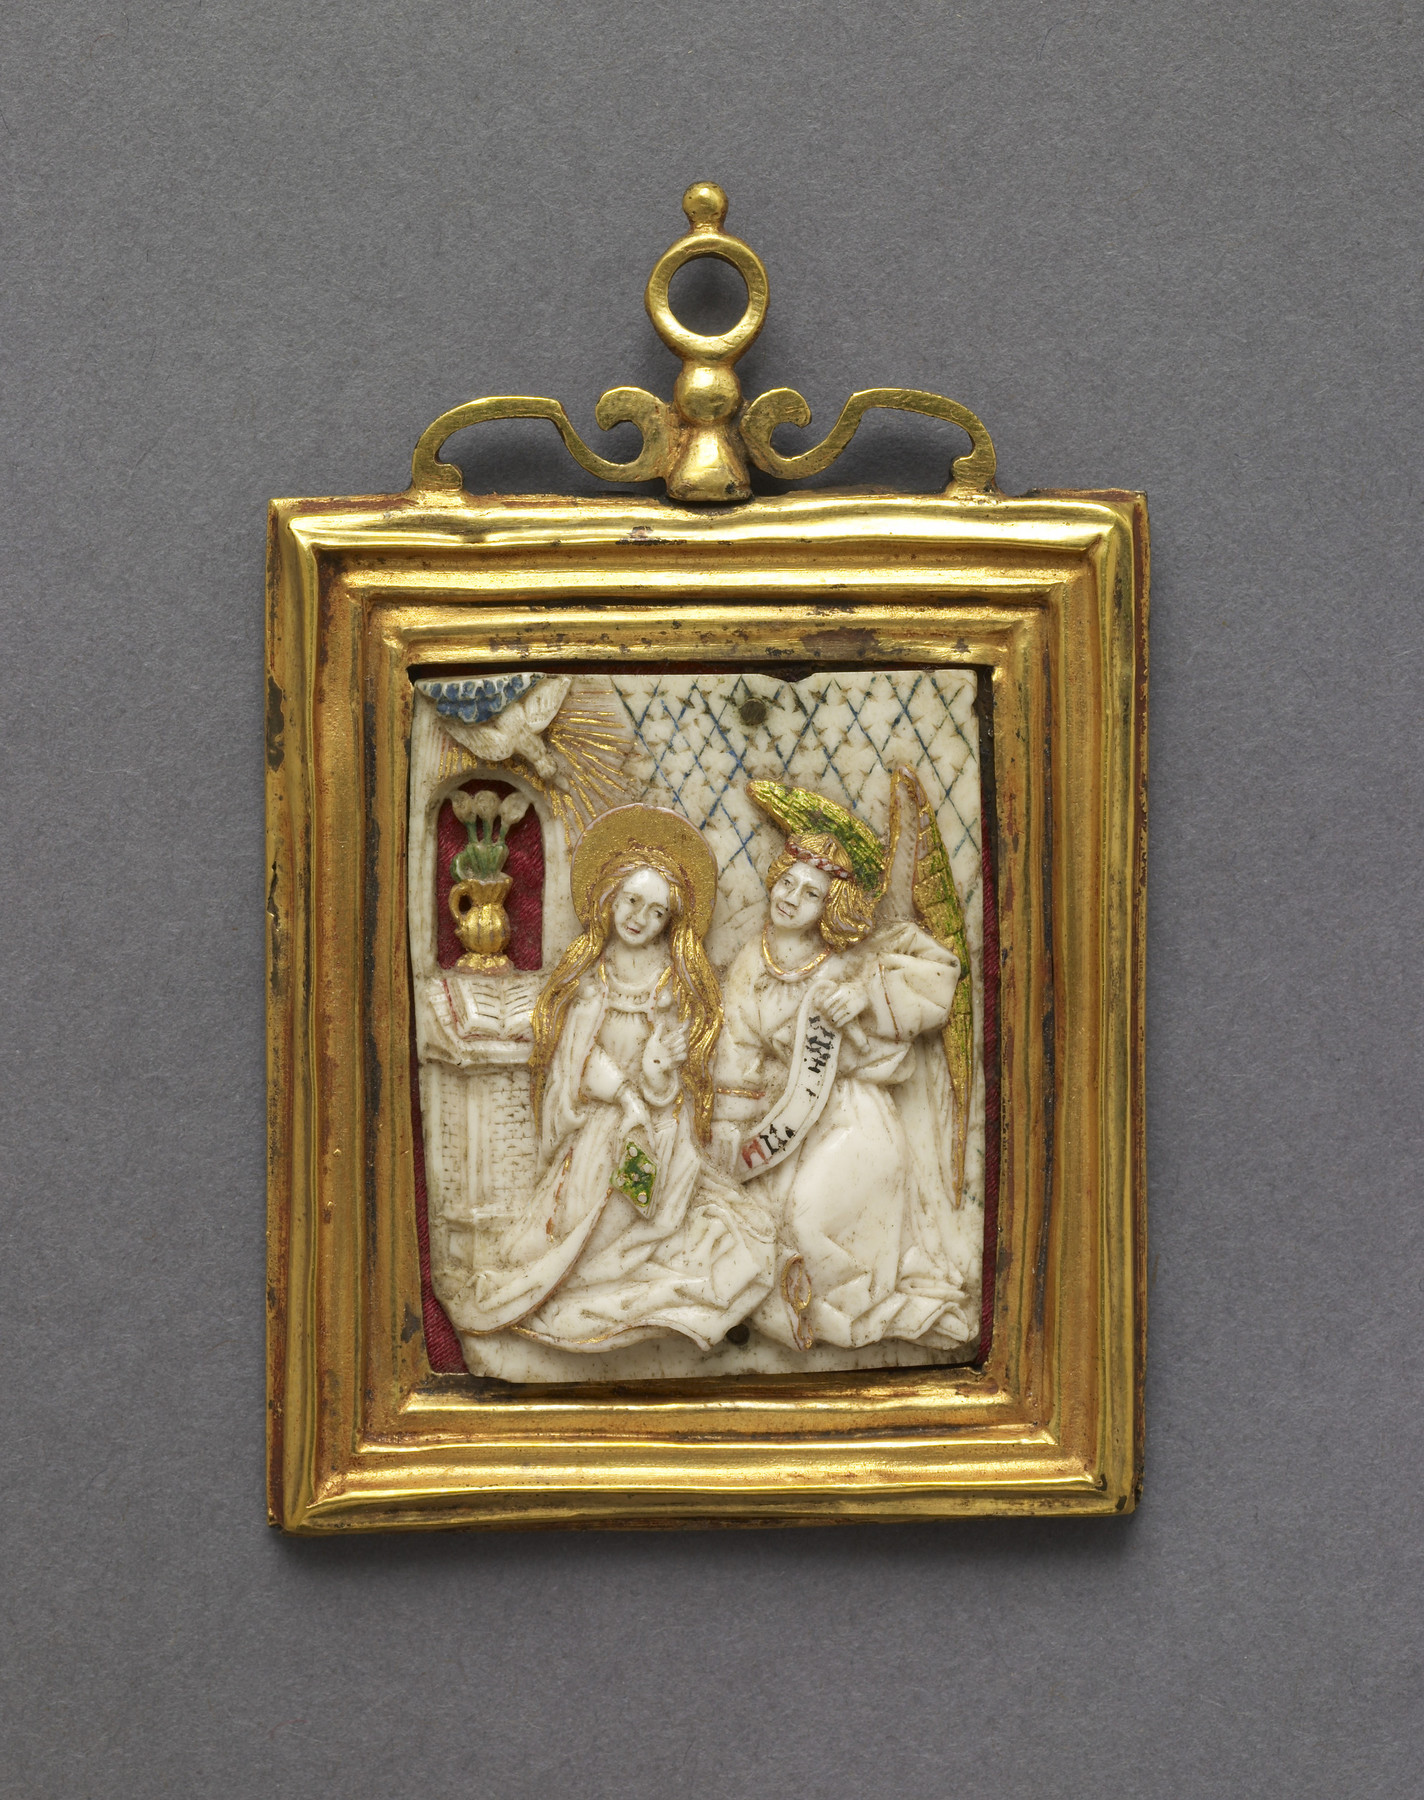 Image for Devotional Plaquette with the Annunciation